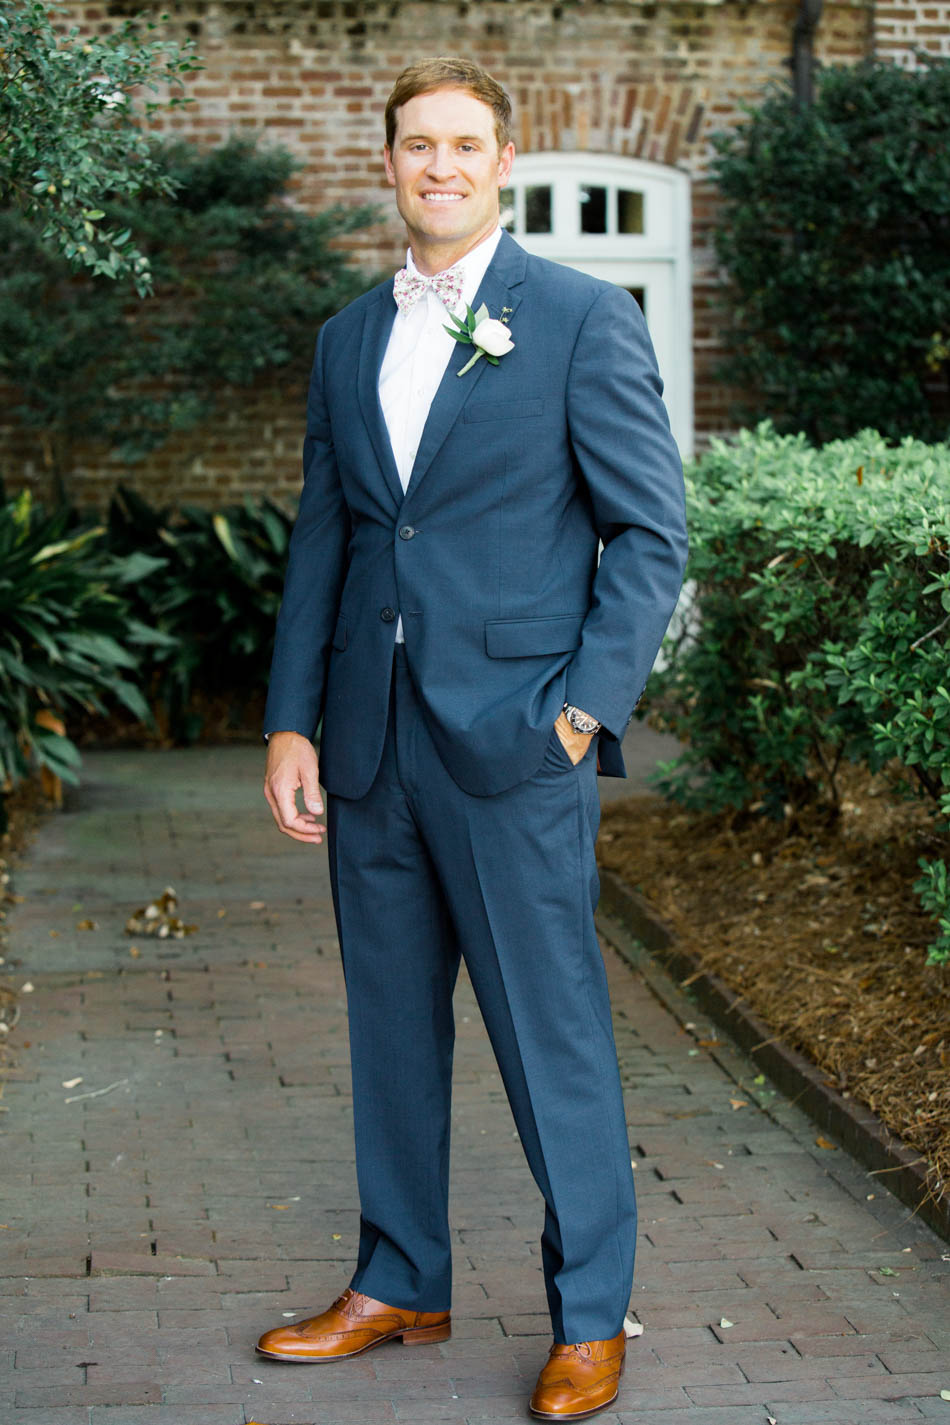 Groom stands in front of the Rice Mill Building, Charleston, South Carolina Kate Timbers Photography. http://katetimbers.com #katetimbersphotography // Charleston Photography // Inspiration